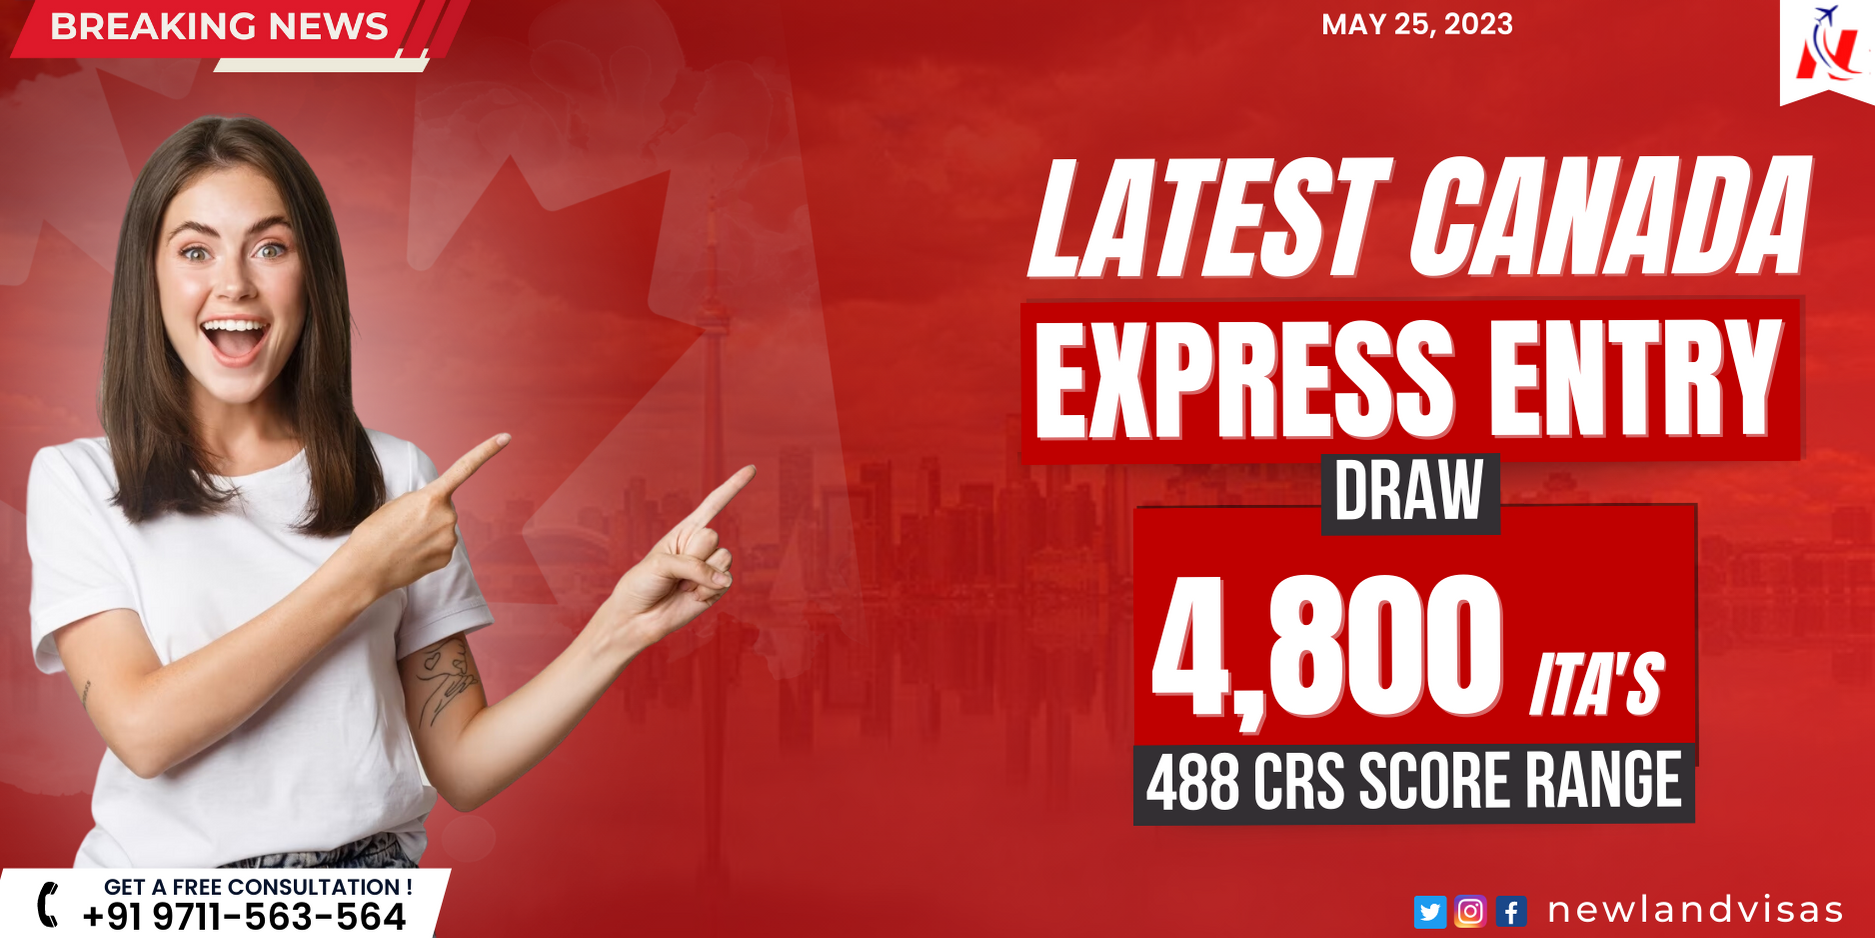 IRCC offers 4,800 Canada PR Visa ITAs in a fresh Express Entry draw